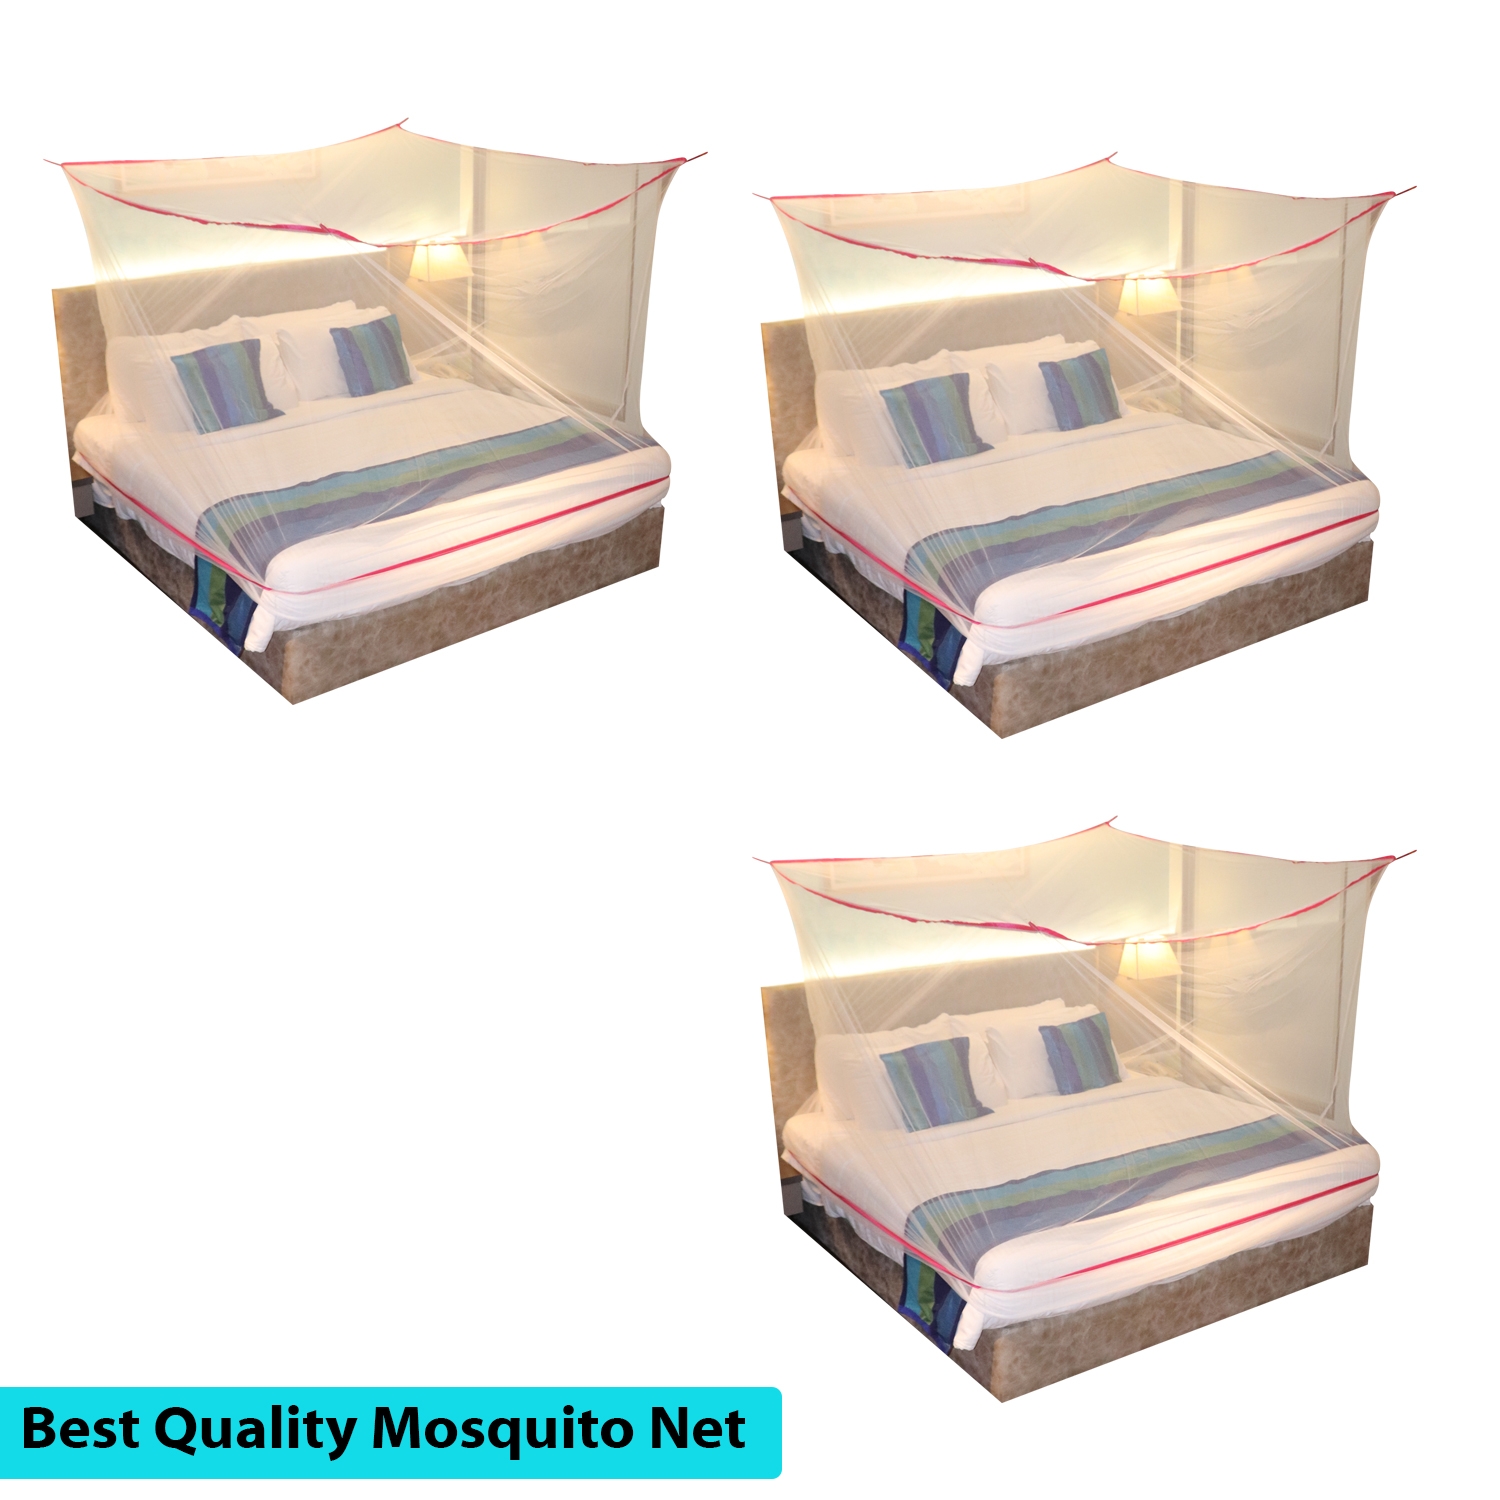 Mosquito Net for Double Bed, King-Size, Square Hanging Foldable Polyester Net White And PinkPack of 3